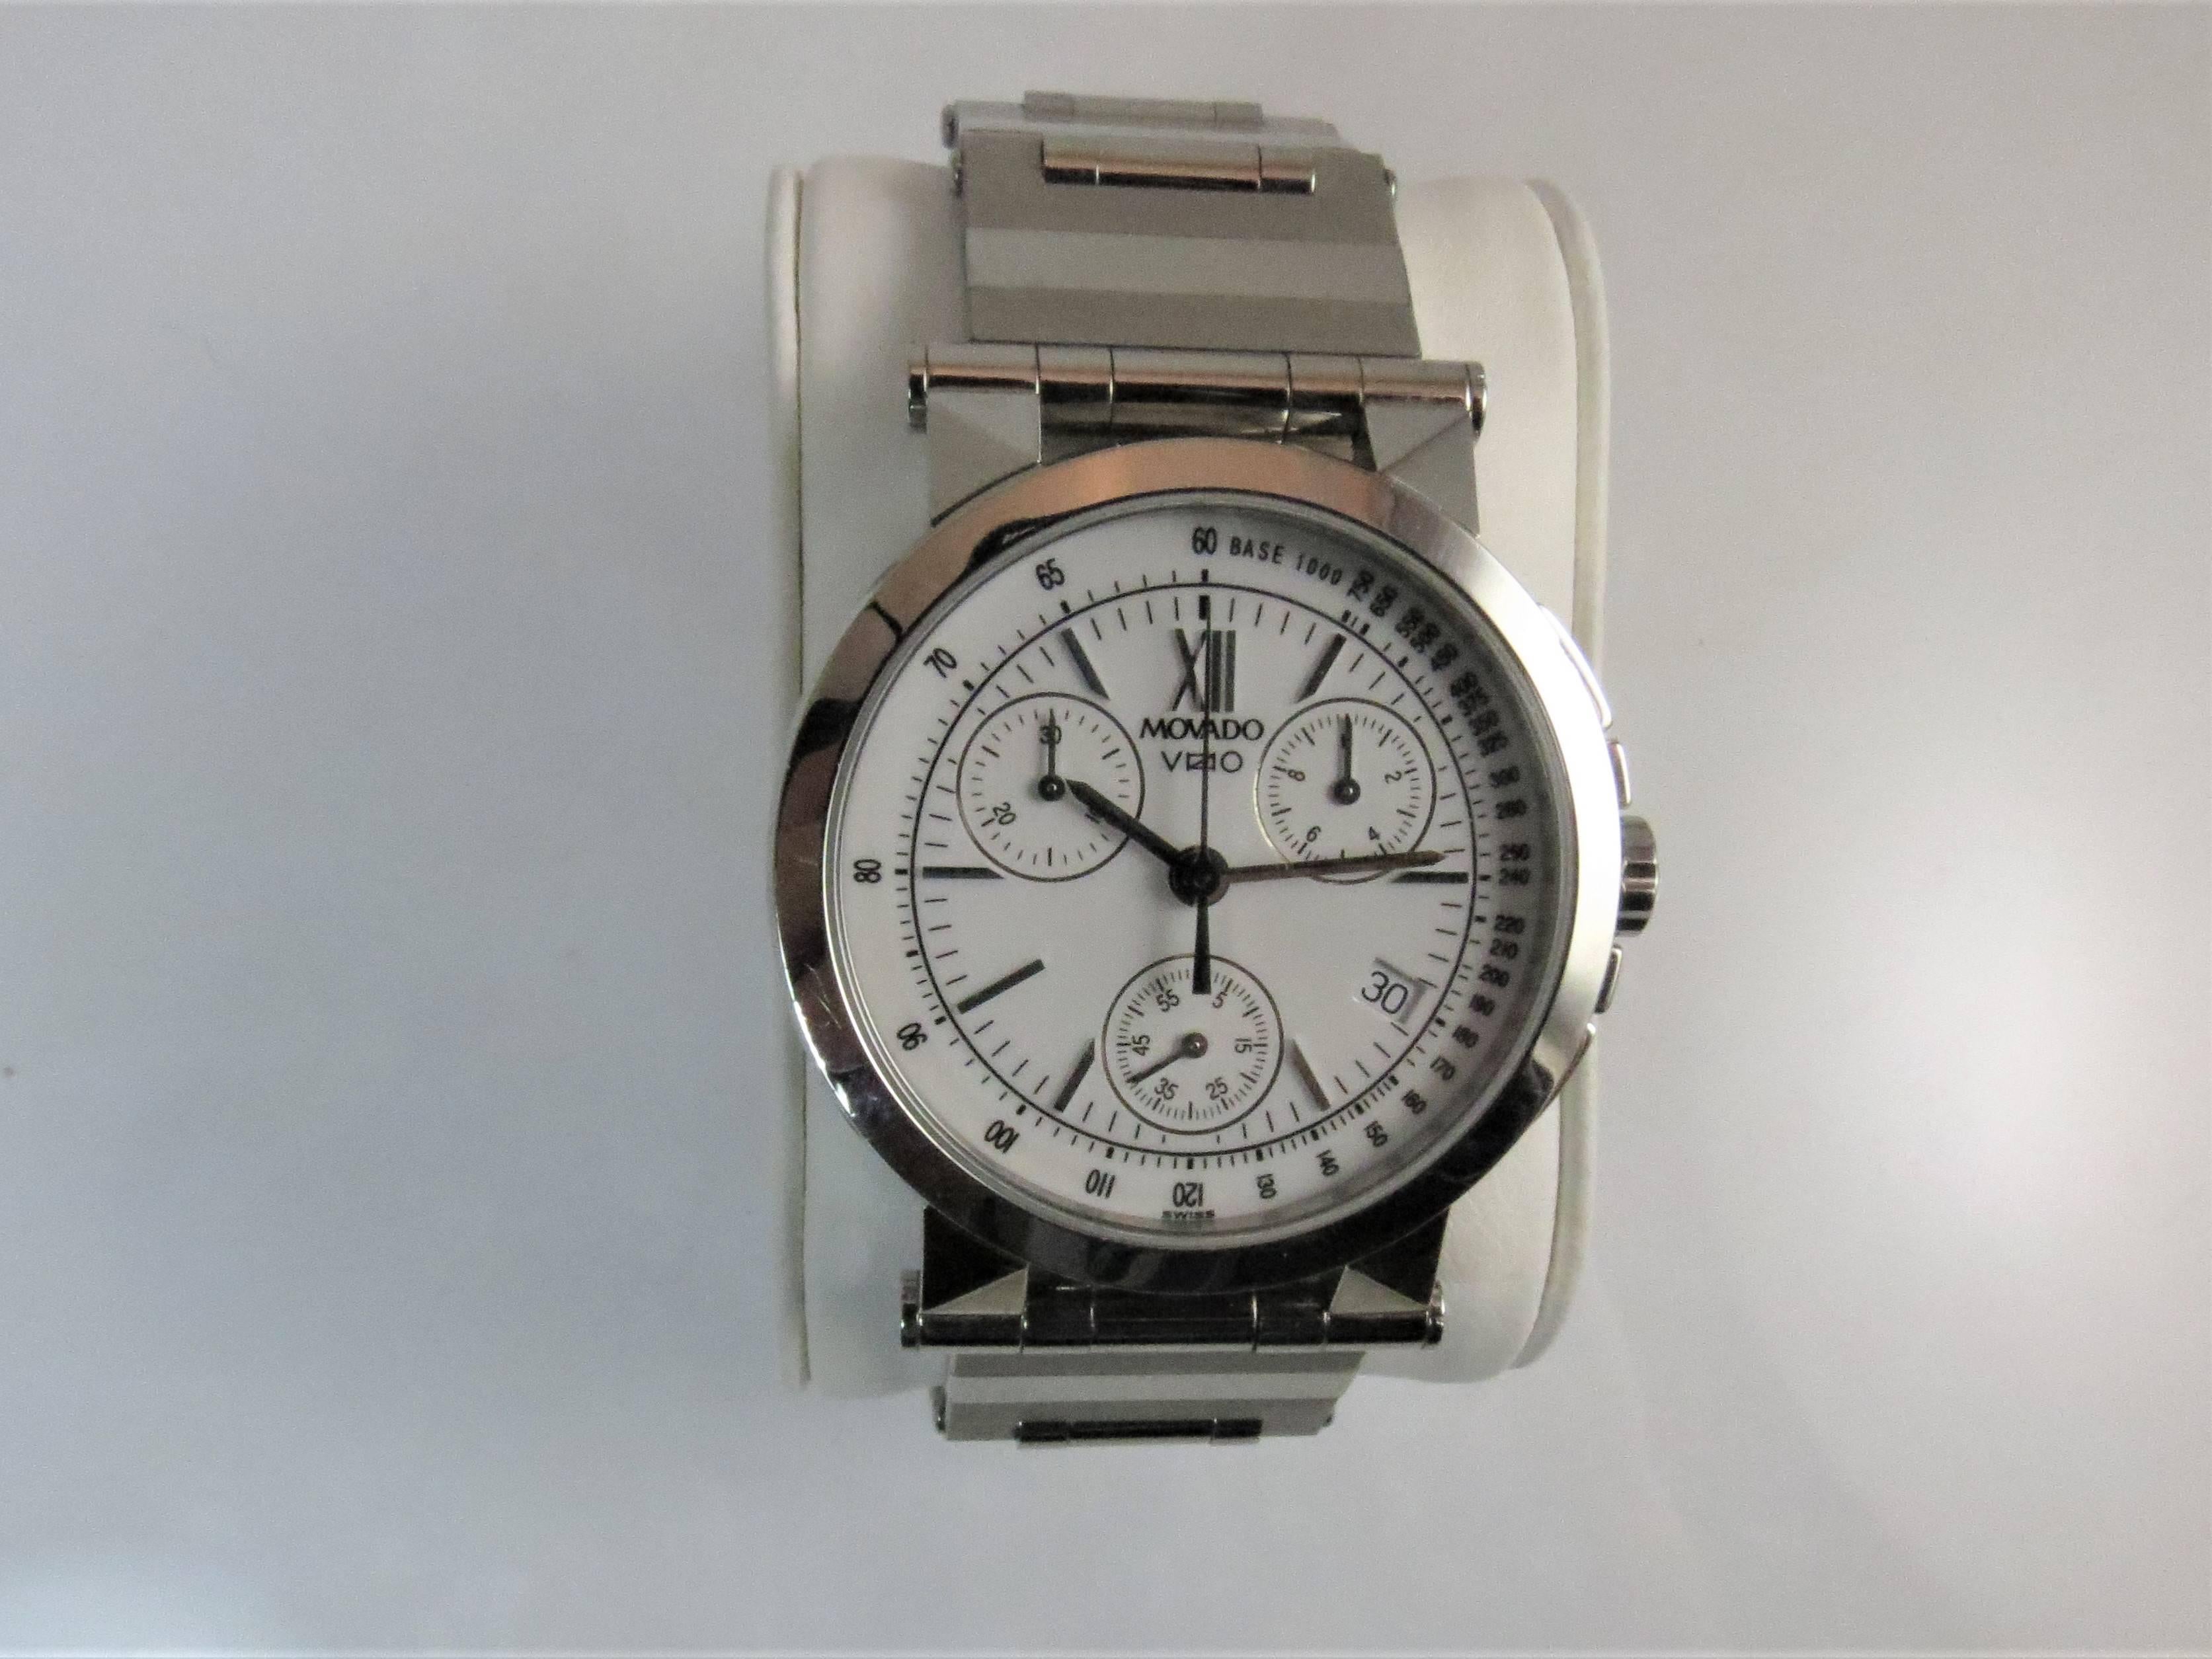 Brand new, never worn, stainless steel Movodo Vizio Chronograph bracelet watch, white dial, case size 36mm, complications: date, sub second, chronograph movement, quartz. 7 inches long, may be sized.Model number 84C50898R30, Serial #3399104
last